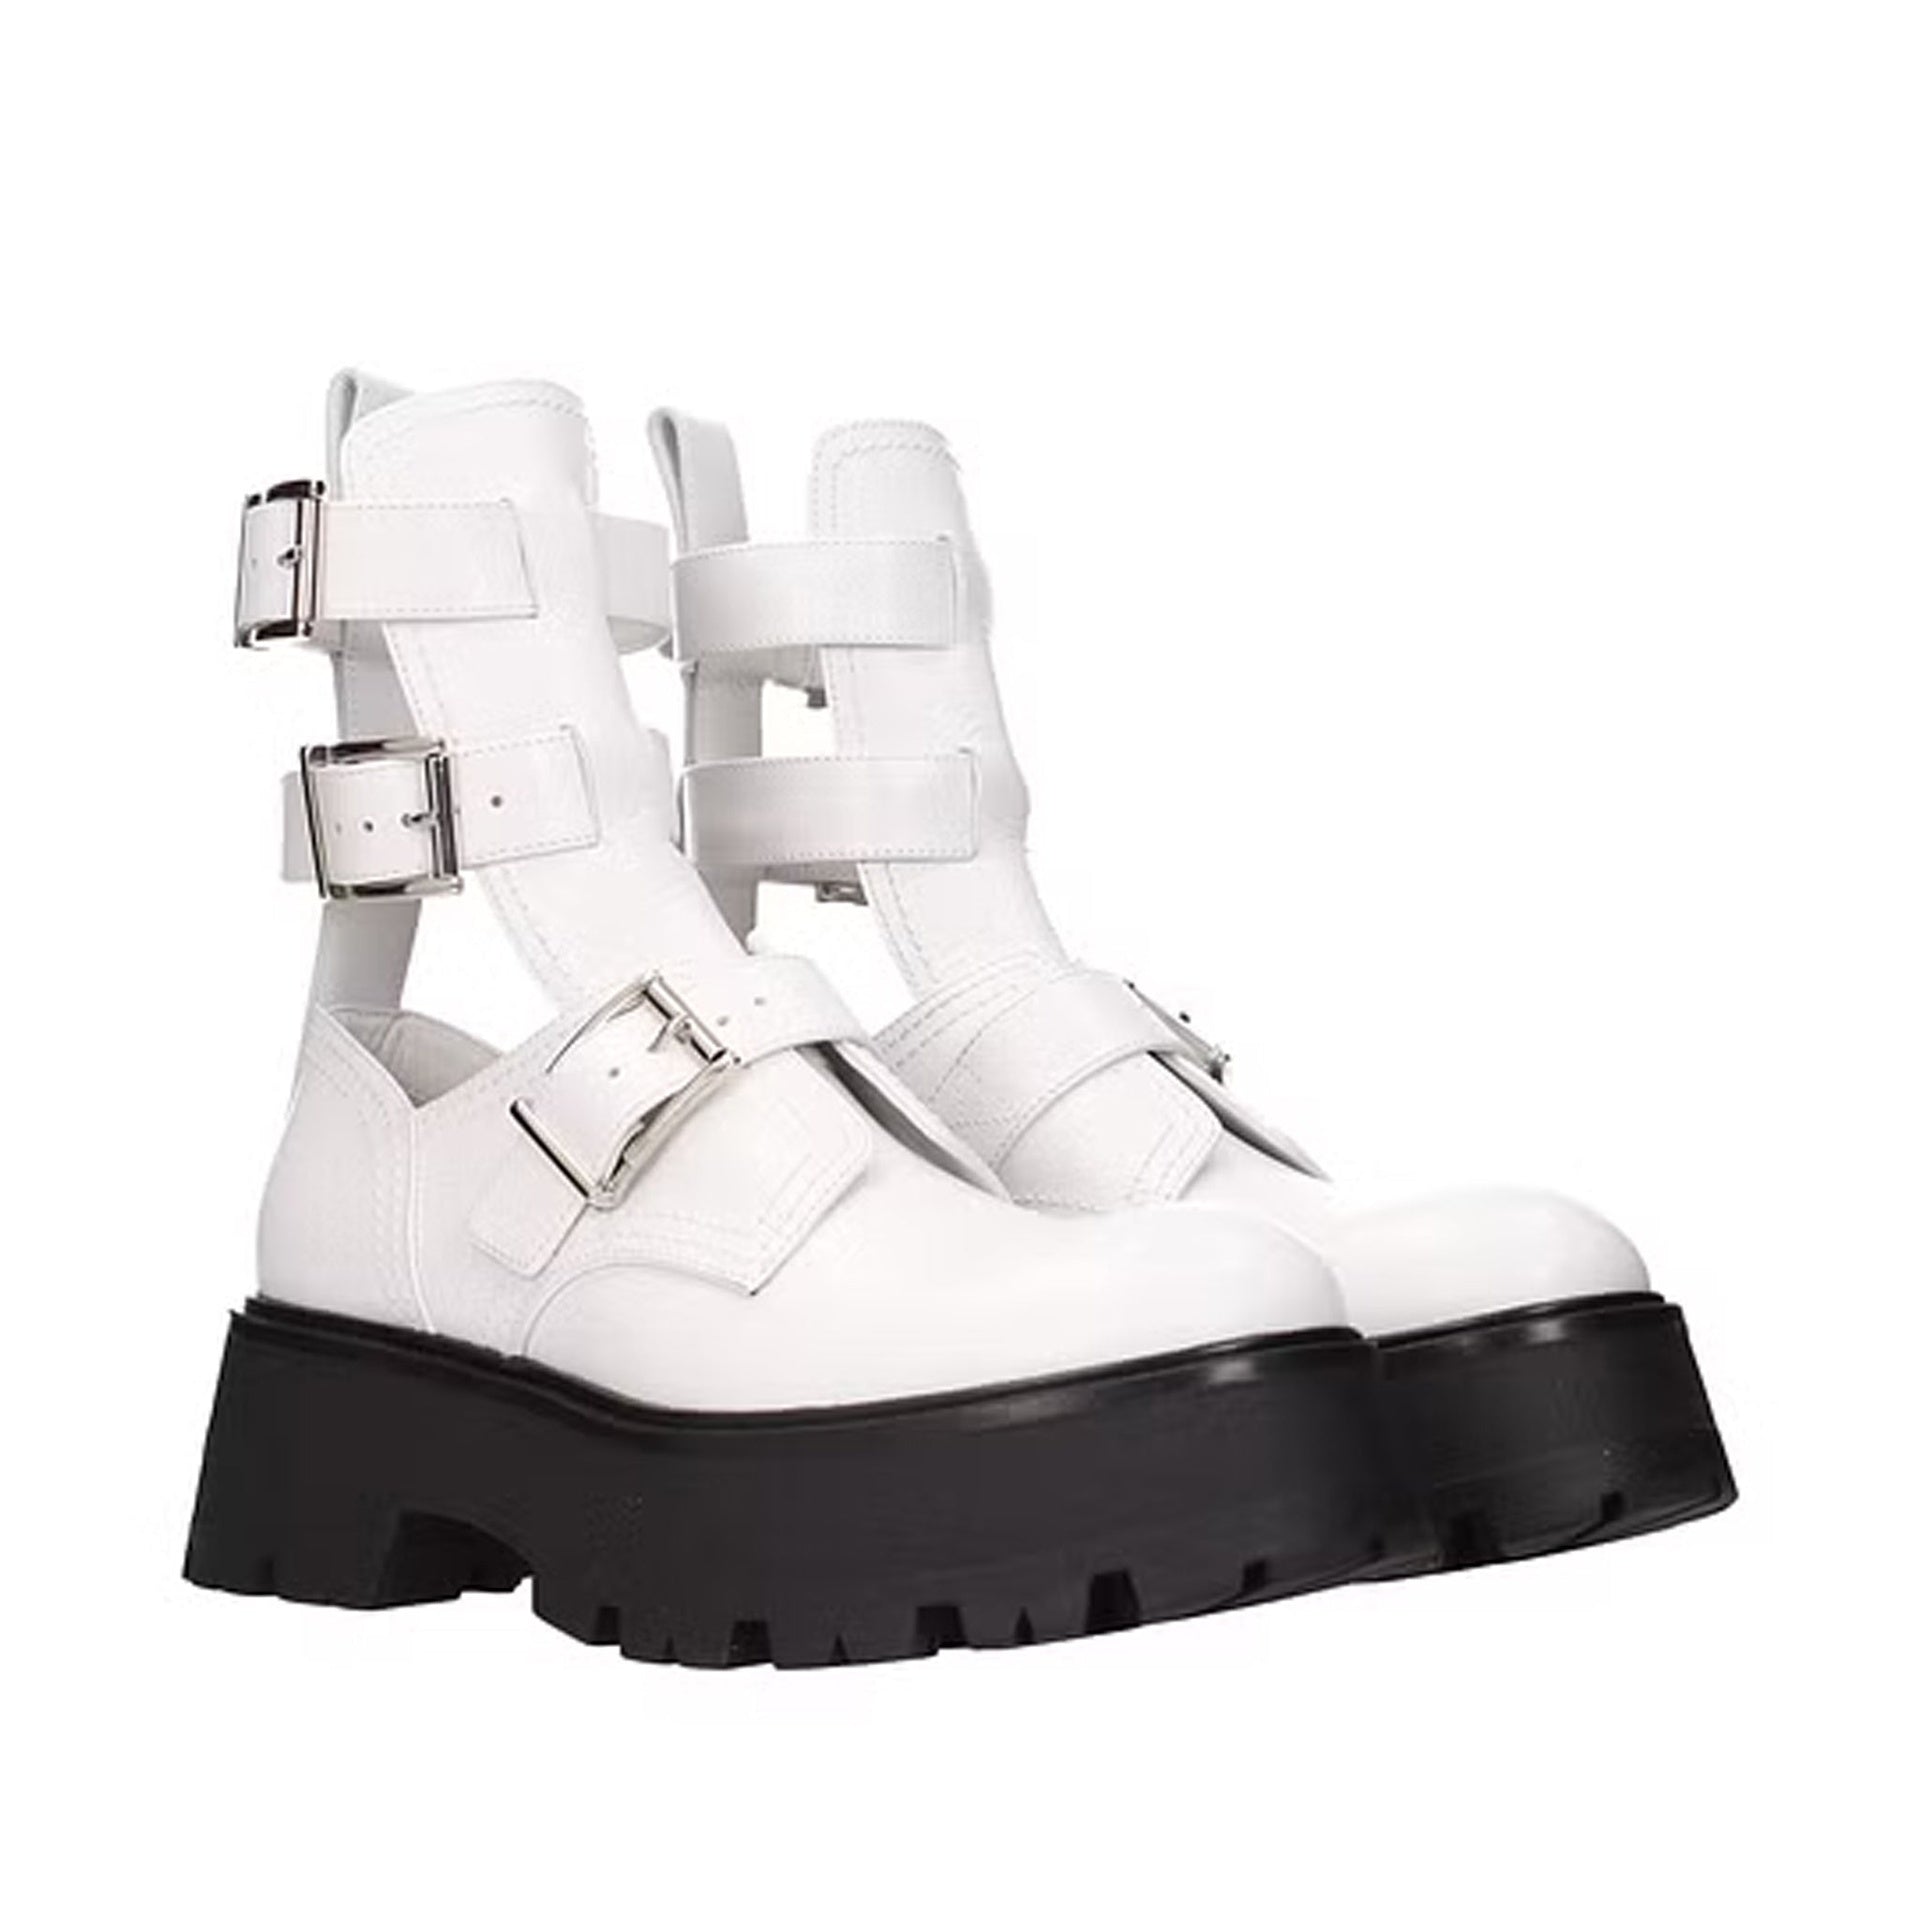 ALEXANDER-MCQUEEN-OUTLET-SALE-Alexander-Mcqueen-Leather-Ankle-Boots-Stiefel-Stiefeletten-WHITE-37_5-ARCHIVE-COLLECTION-2.jpg